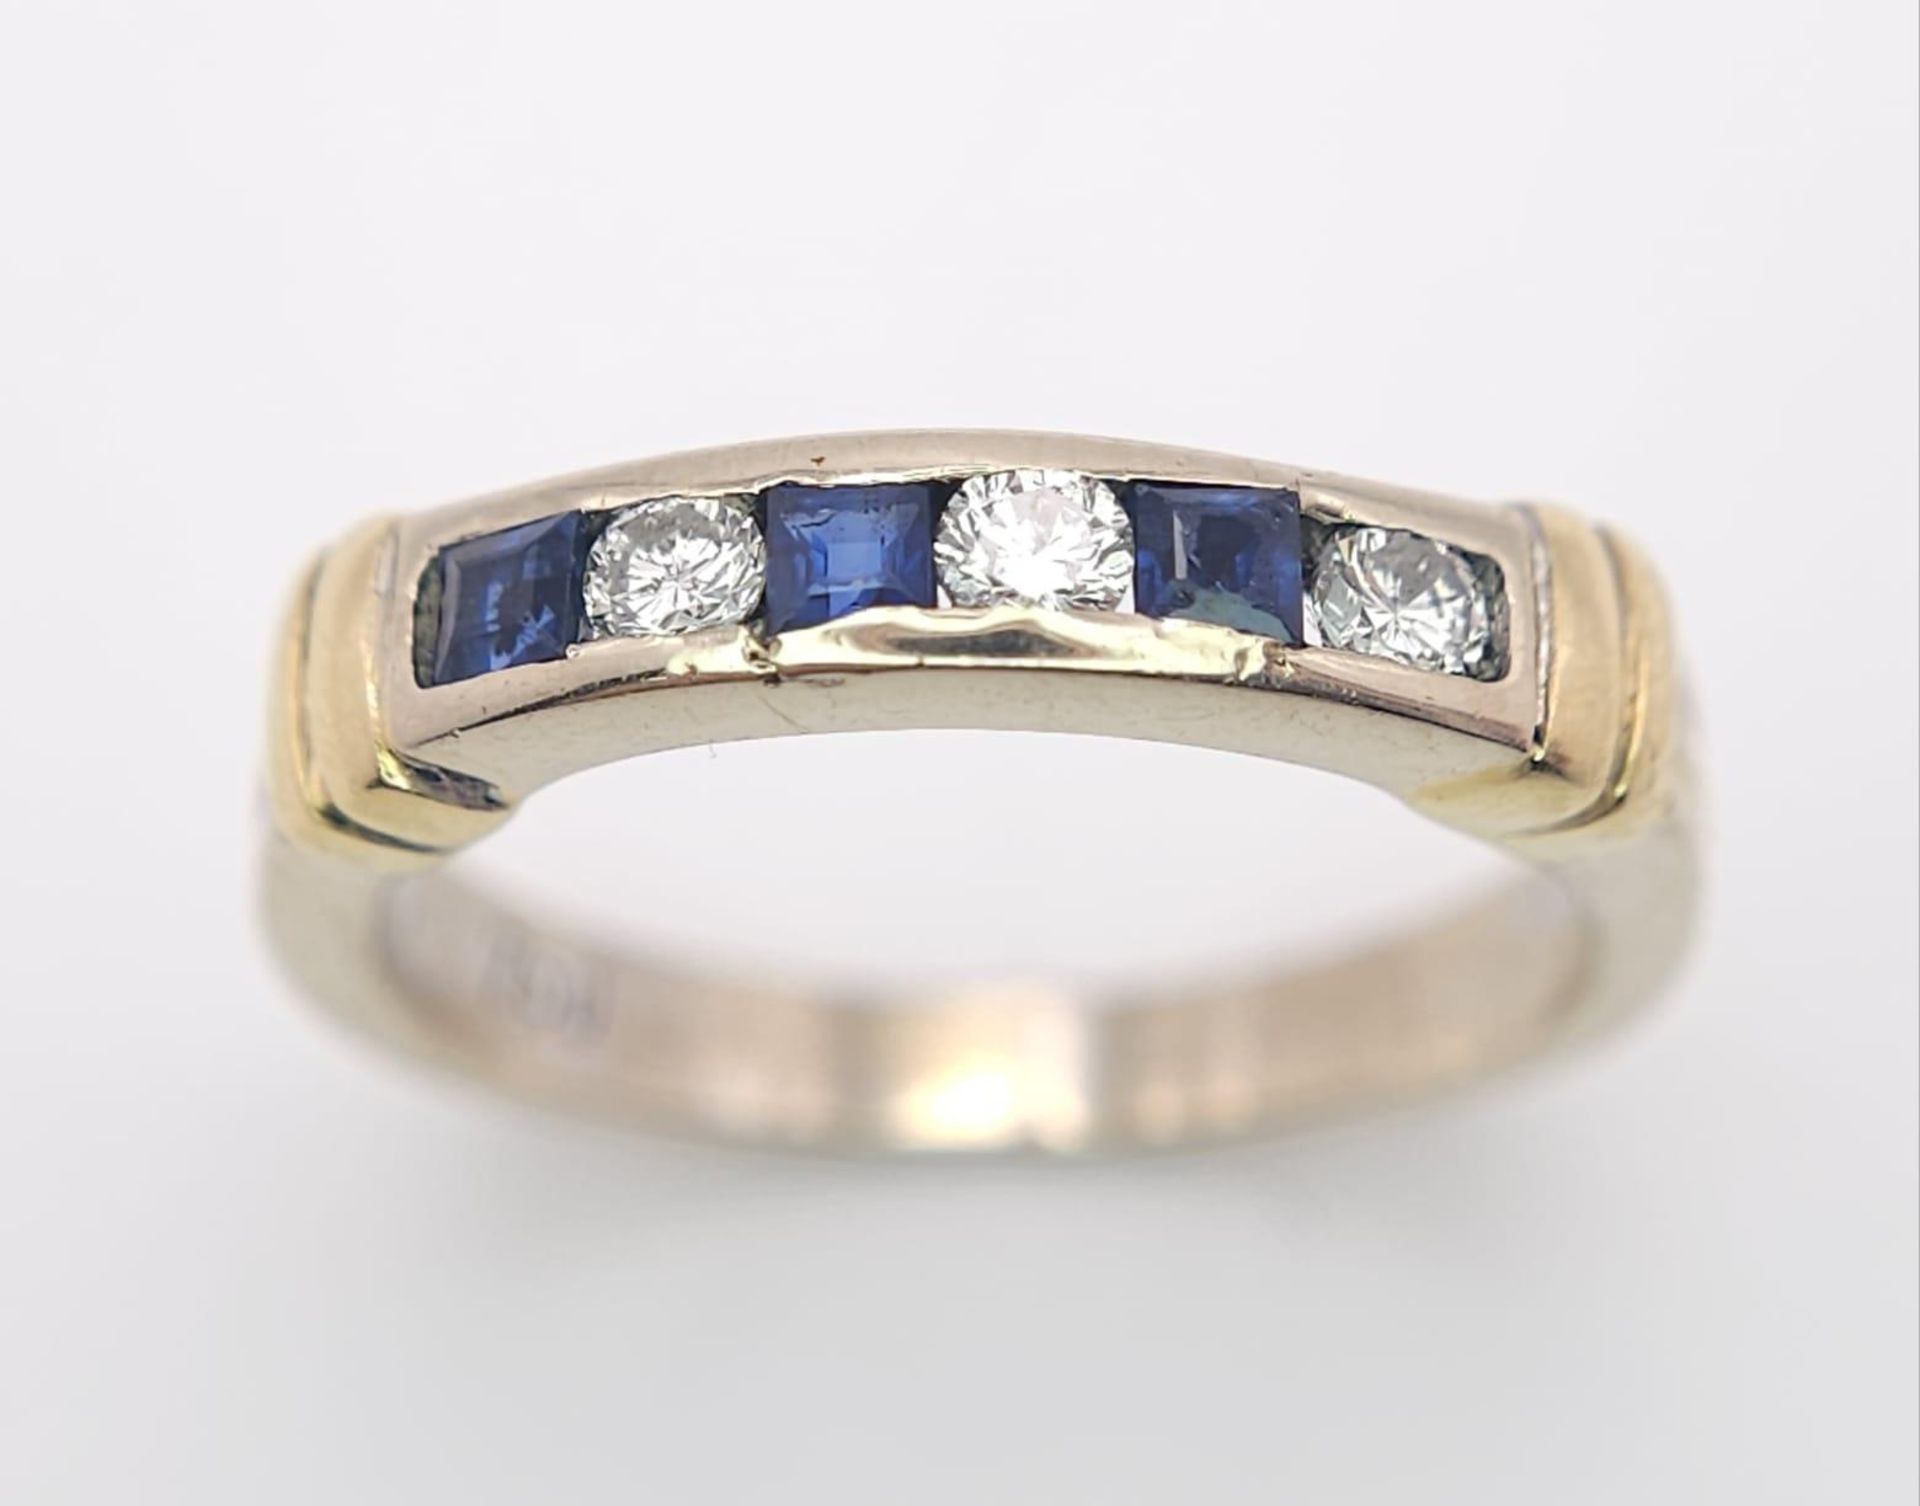 An 18 K yellow gold ring with alternating blue sapphires and diamonds. Size: K, weight: 3.2 g. - Image 3 of 13